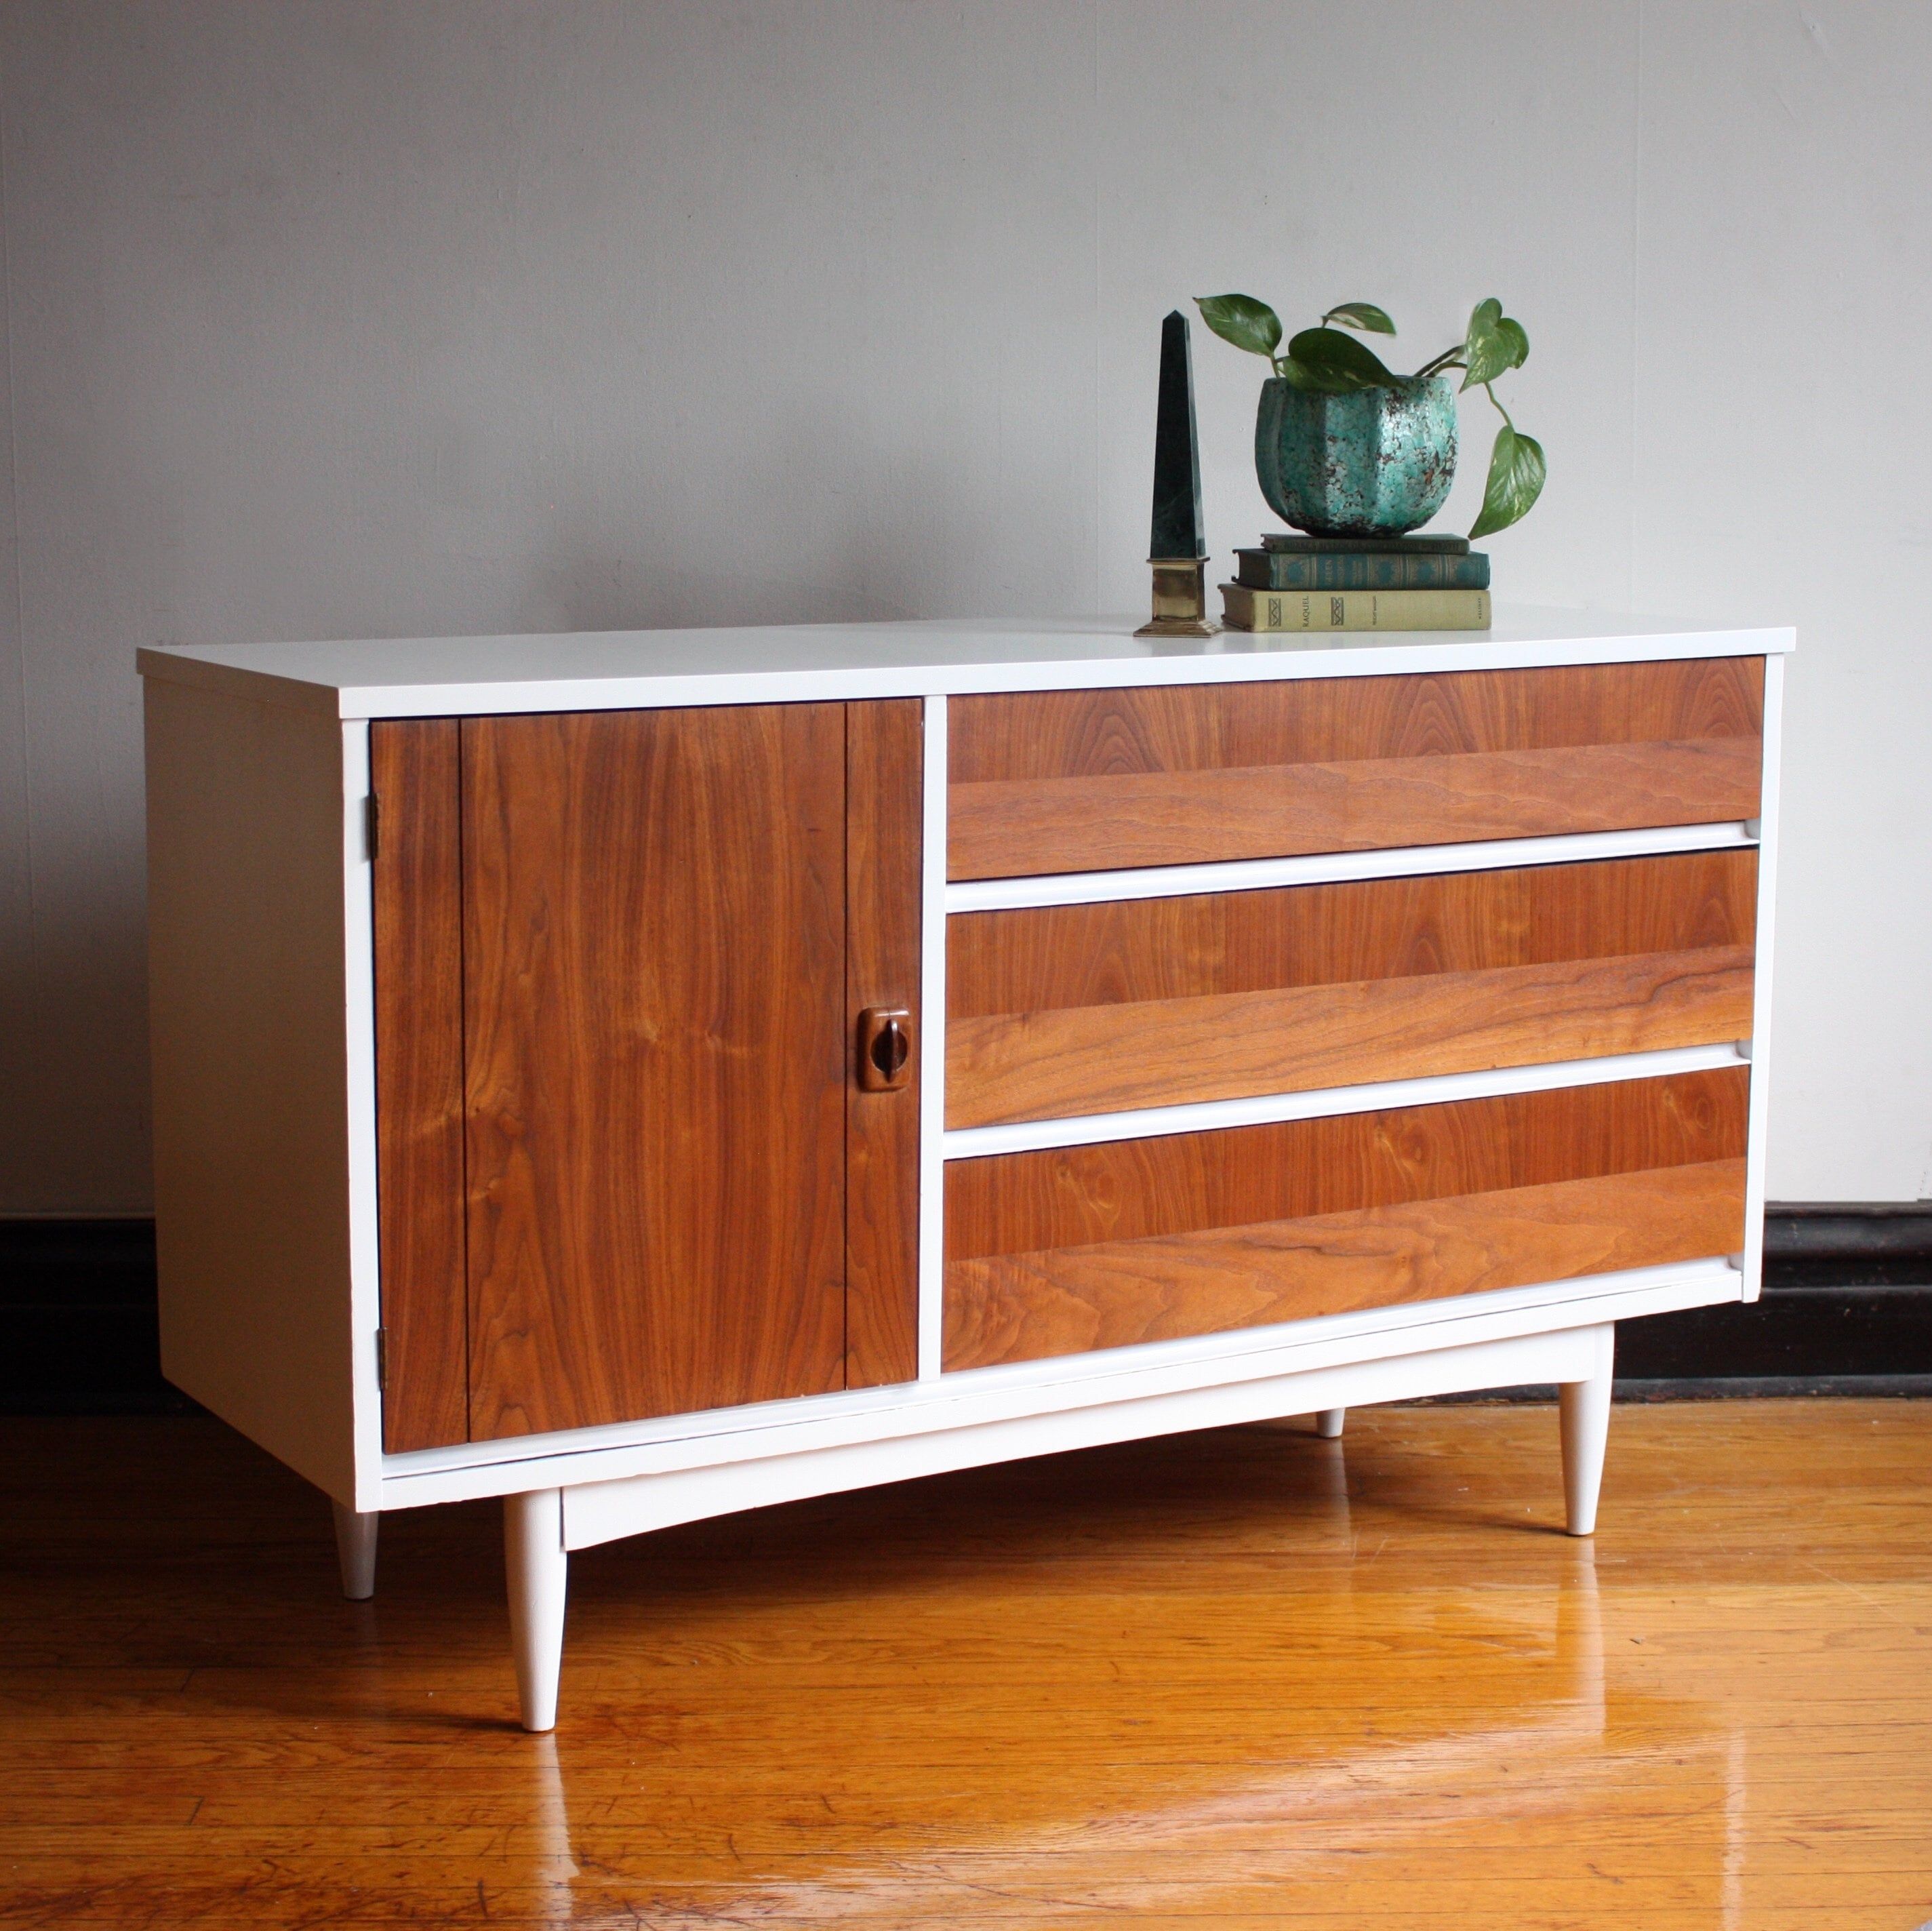 Soldwhite And Wood Mid Century Modern Credenza//mcm Media – Etsy Within Mid Century Modern White Sideboards (View 8 of 15)